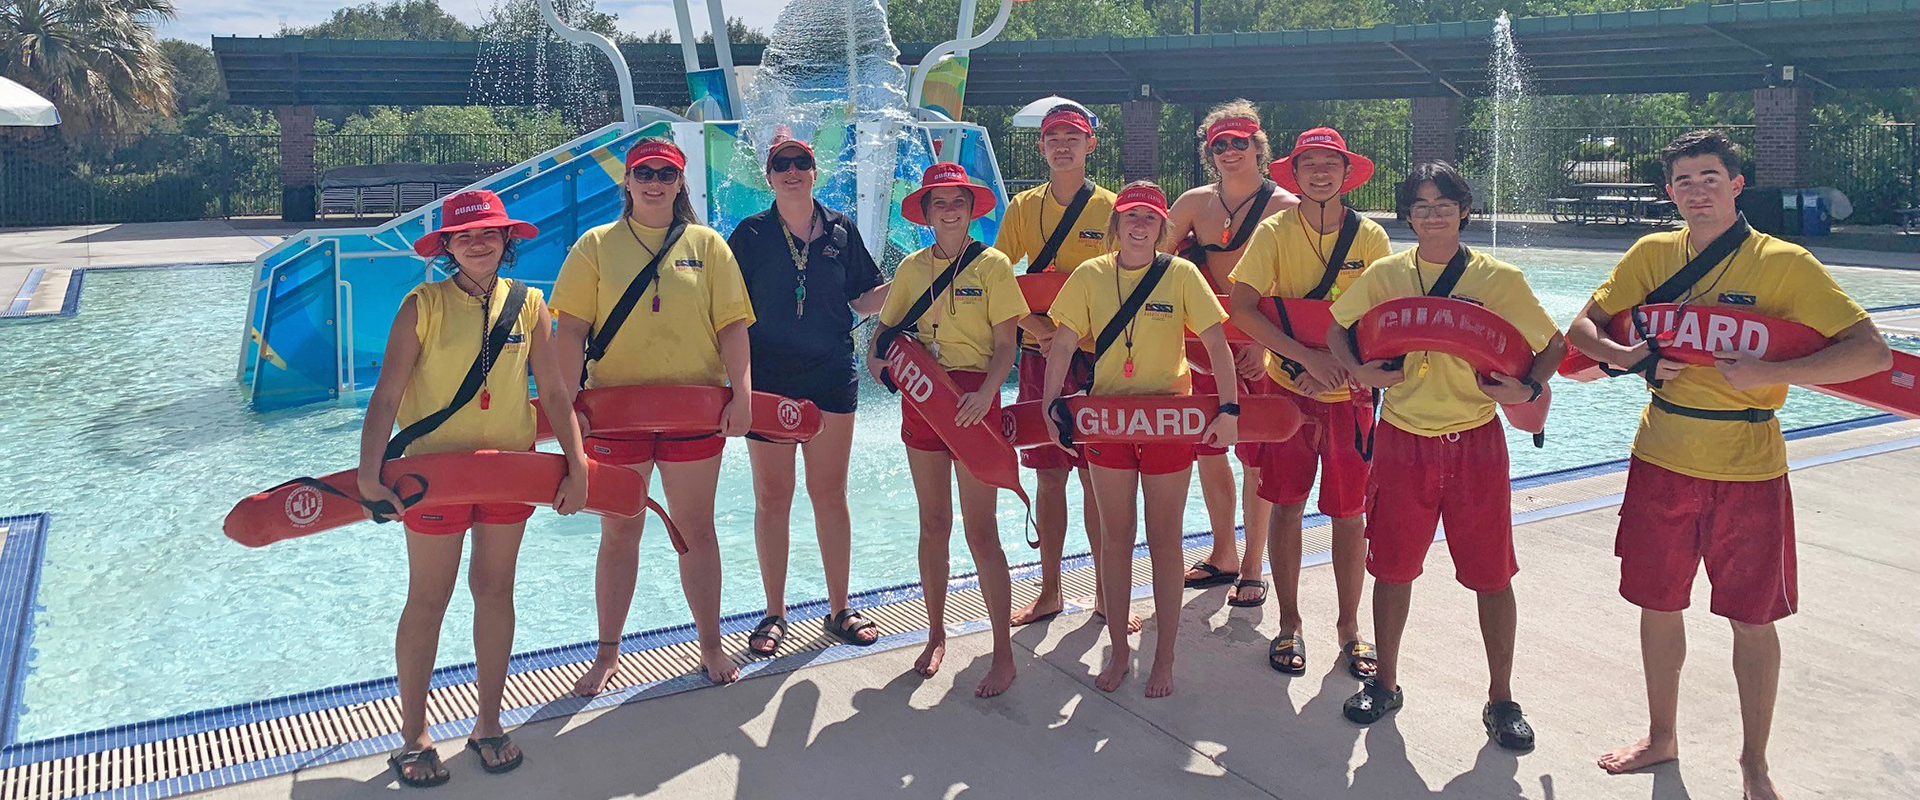 aquatic center lifeguards in front of the play water structure 